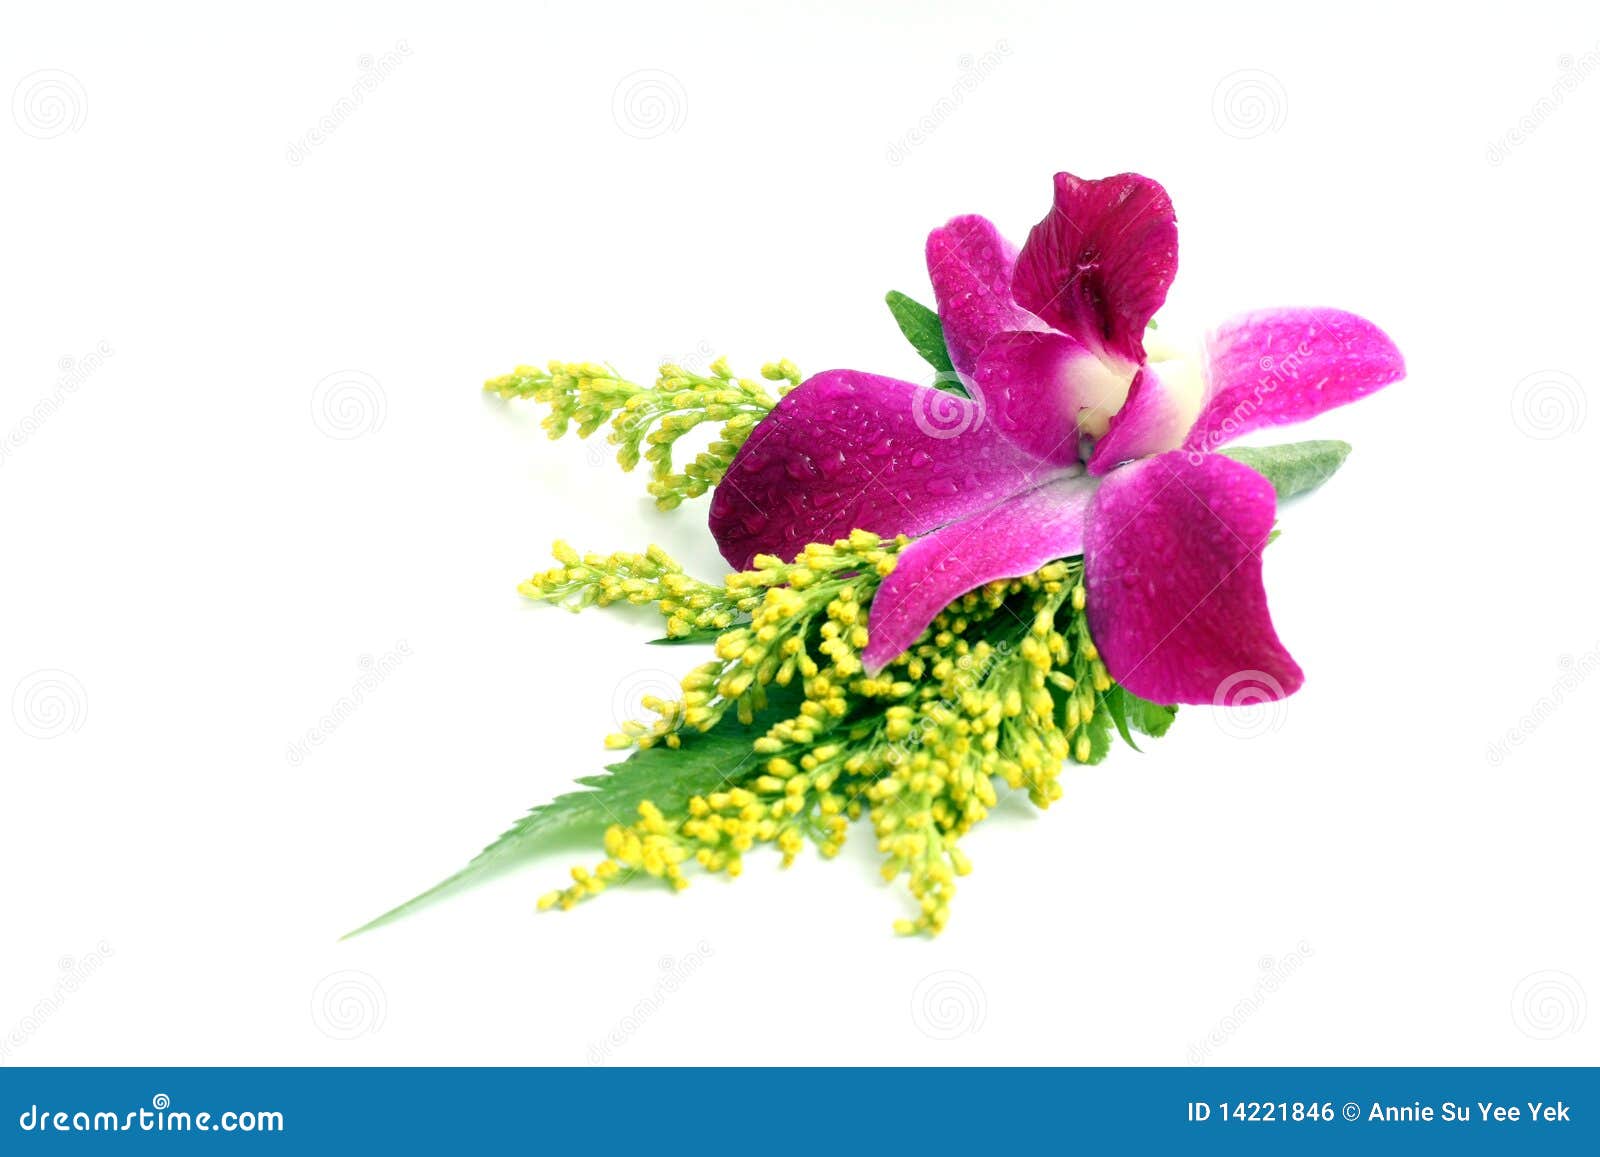 orchid corsage